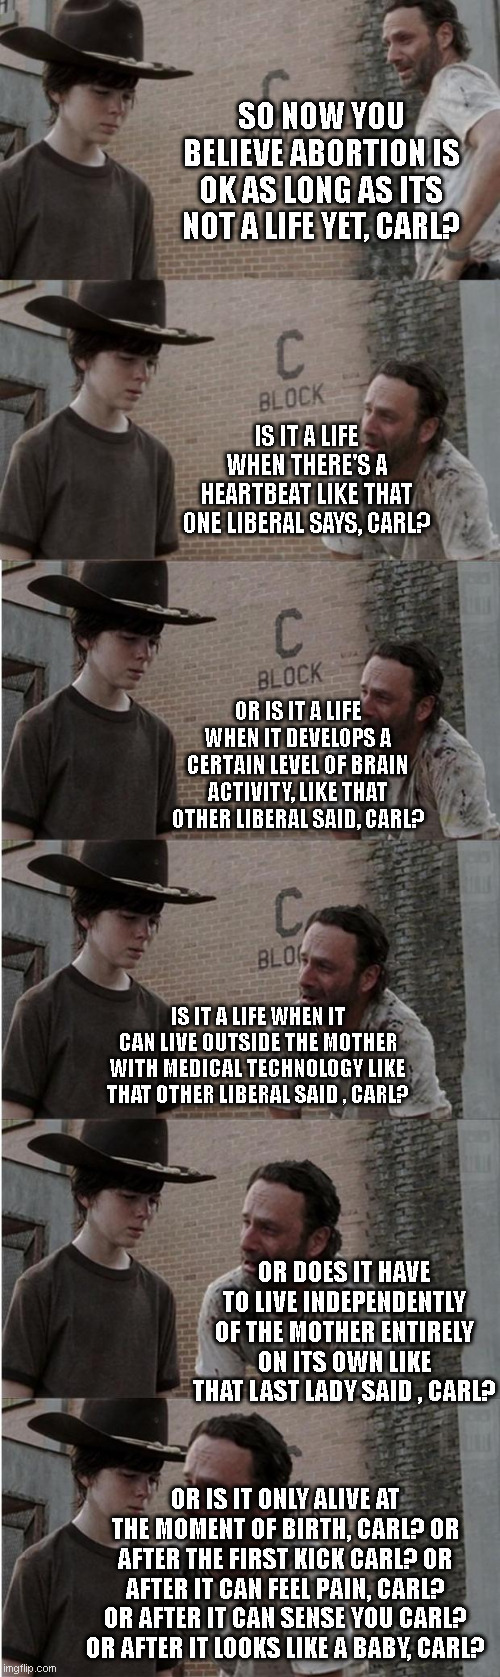 Carl became pro-choice ... carl didn't think it through.. | SO NOW YOU BELIEVE ABORTION IS OK AS LONG AS ITS NOT A LIFE YET, CARL? IS IT A LIFE WHEN THERE'S A HEARTBEAT LIKE THAT ONE LIBERAL SAYS, CARL? OR IS IT A LIFE WHEN IT DEVELOPS A CERTAIN LEVEL OF BRAIN ACTIVITY, LIKE THAT OTHER LIBERAL SAID, CARL? IS IT A LIFE WHEN IT CAN LIVE OUTSIDE THE MOTHER WITH MEDICAL TECHNOLOGY LIKE THAT OTHER LIBERAL SAID , CARL? OR DOES IT HAVE TO LIVE INDEPENDENTLY OF THE MOTHER ENTIRELY ON ITS OWN LIKE THAT LAST LADY SAID , CARL? OR IS IT ONLY ALIVE AT THE MOMENT OF BIRTH, CARL? OR AFTER THE FIRST KICK CARL? OR AFTER IT CAN FEEL PAIN, CARL? OR AFTER IT CAN SENSE YOU CARL? OR AFTER IT LOOKS LIKE A BABY, CARL? | image tagged in memes,rick and carl longer | made w/ Imgflip meme maker